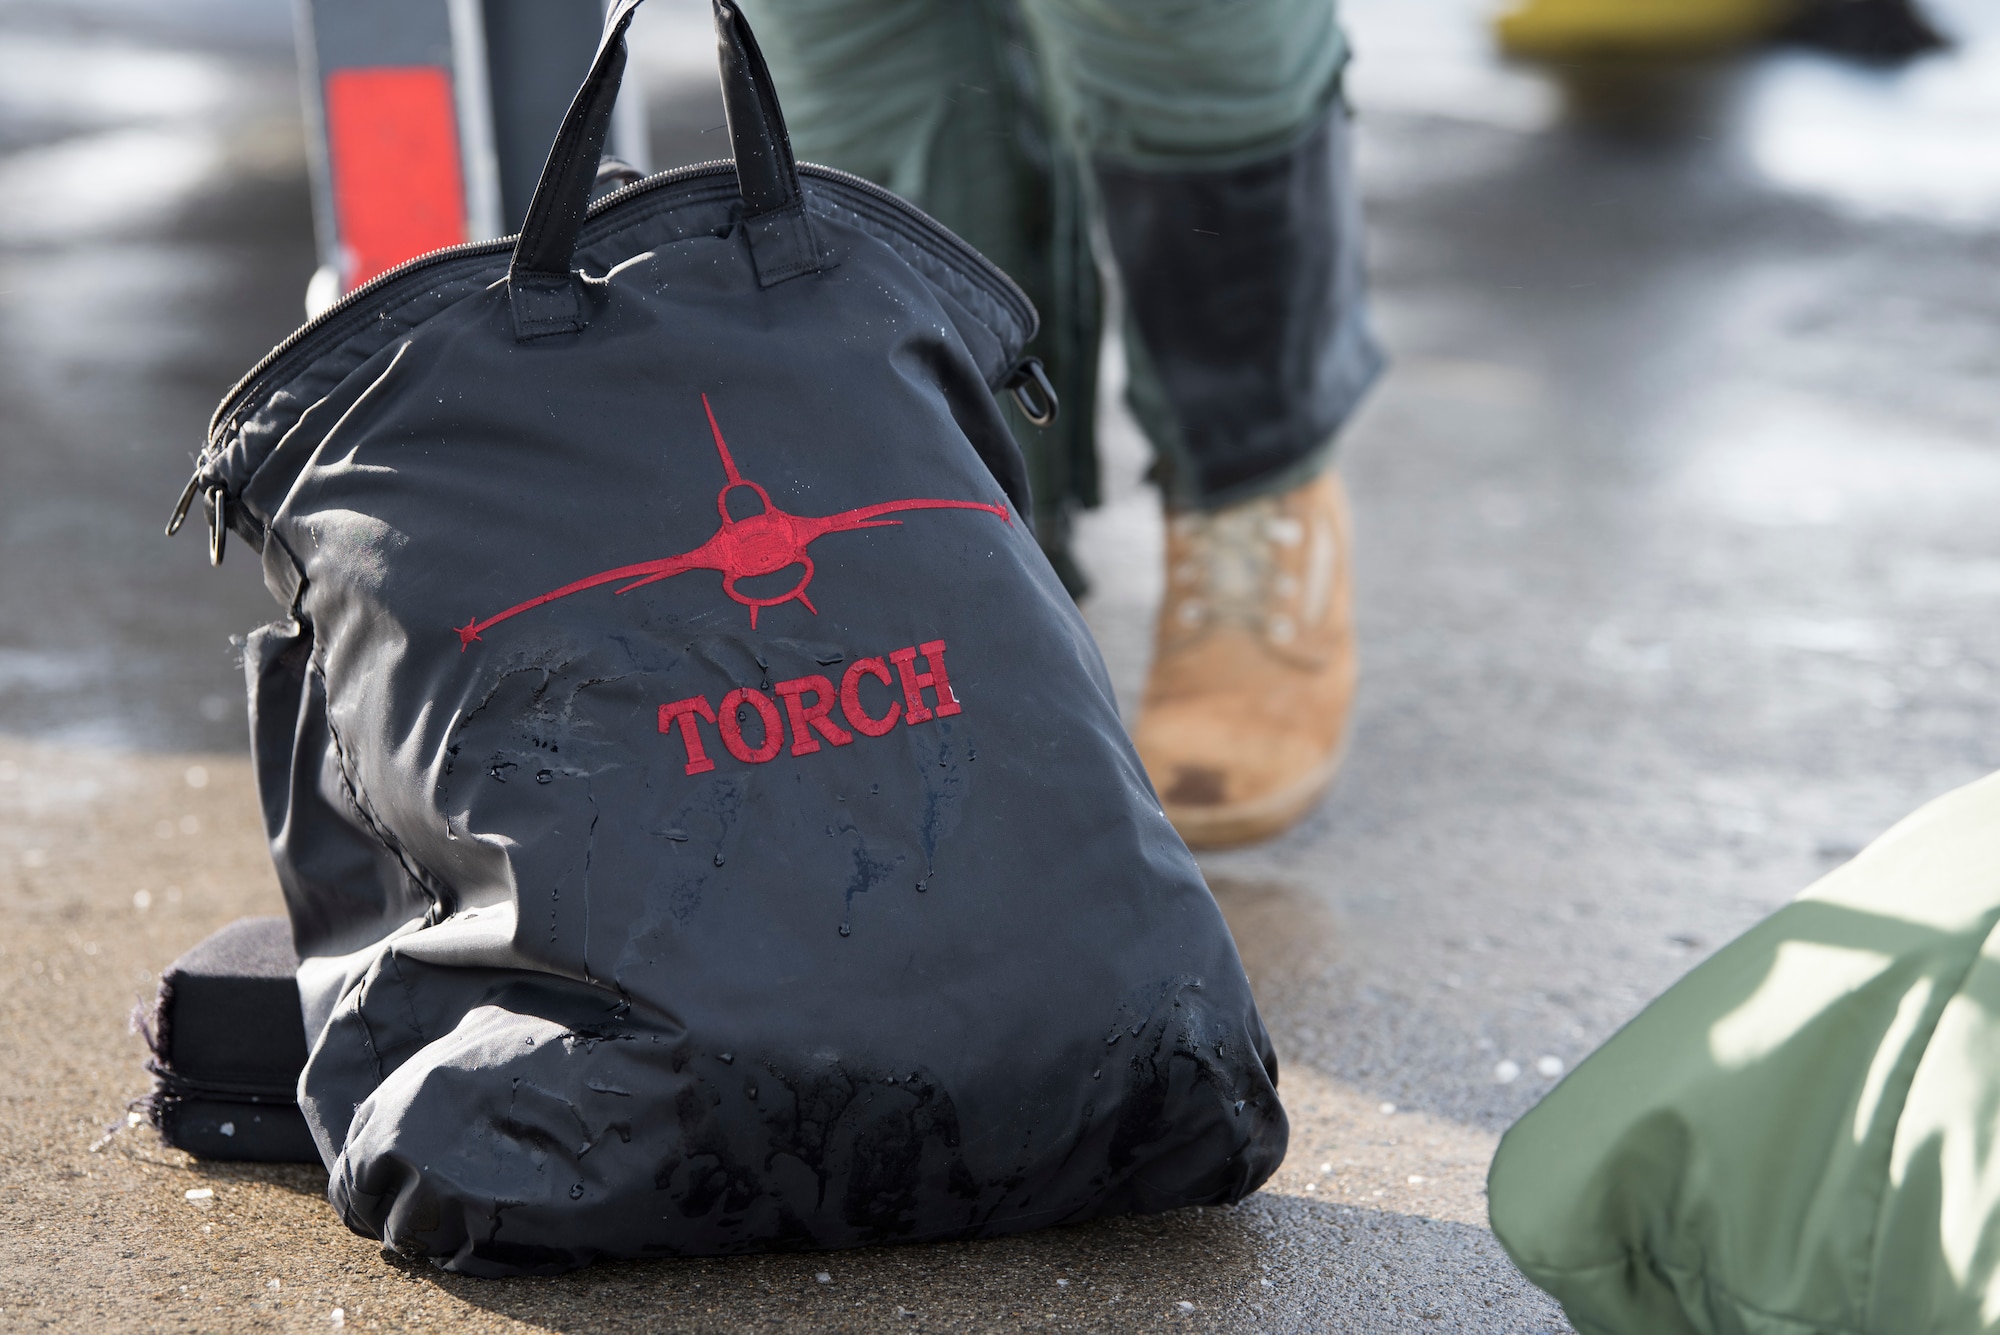 A helmet bag belonging to U.S. Air Force Col. Kristopher Struve, the 35th Fighter Wing commander, lays on the ground at Misawa Air Base, Japan, Dec. 28, 1018. "Torch" is Struve's callsign, which is a specalized form of nickname that is used as a substitue for the aviators given name. He gave U.S. Air Force Chief Master Sgt. John Alsvig, the 35th FW command chief, a familiarization flight allowing him to see the ins and outs of the functions of the F-16 Fighting Falcon. (U.S. Air Force photo by Staff Sgt. B.A. Chase)